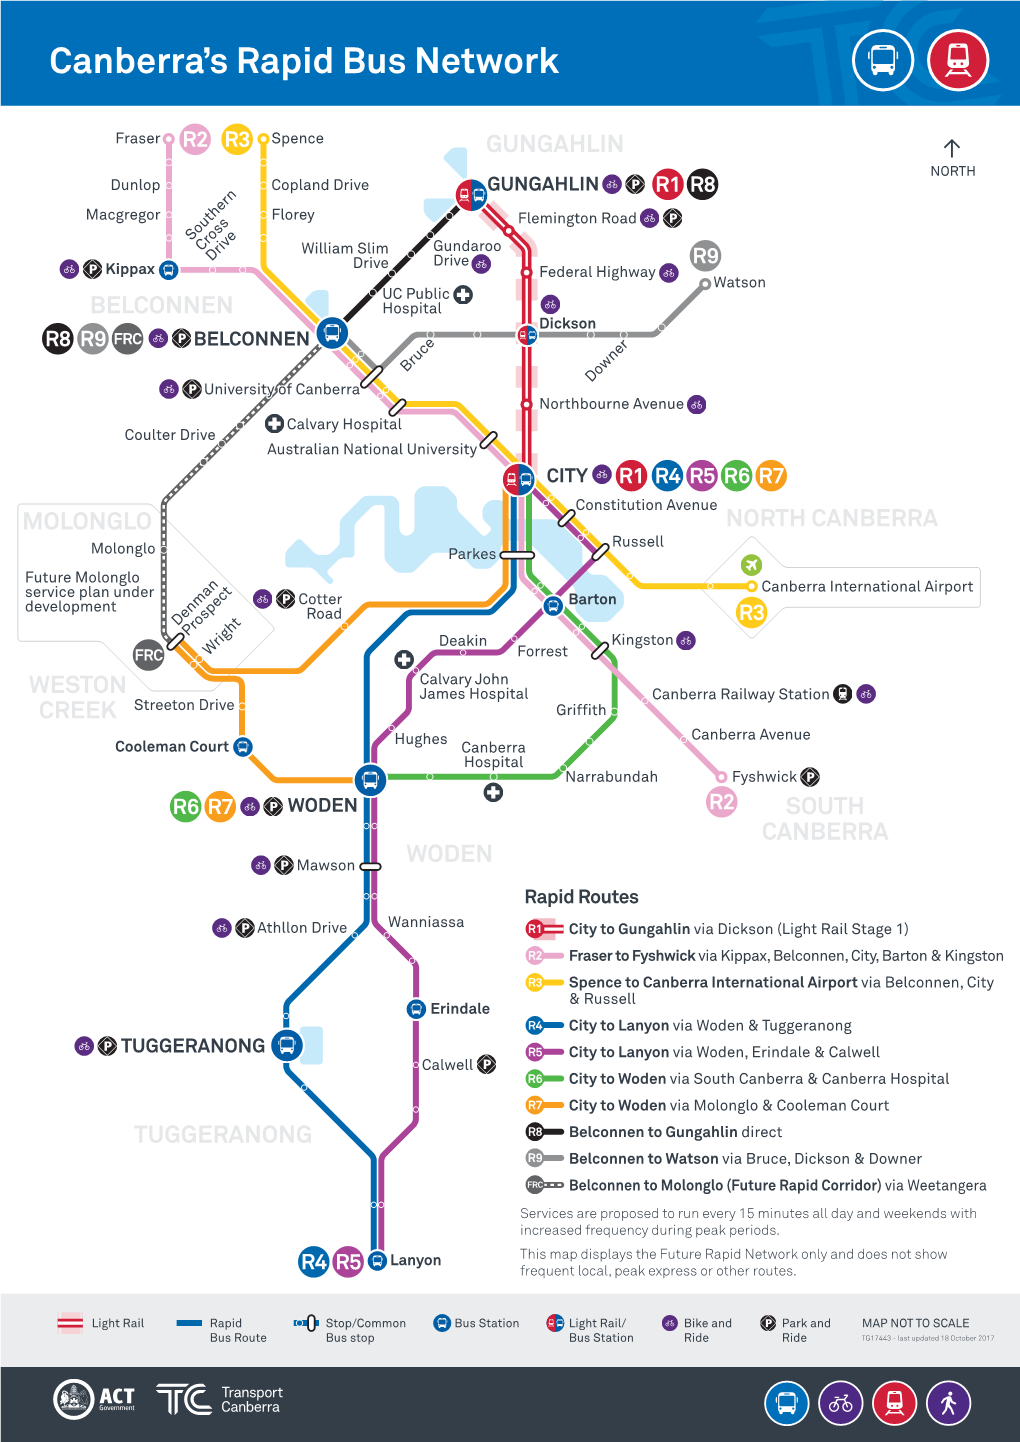 Canberra's Rapid Bus Network